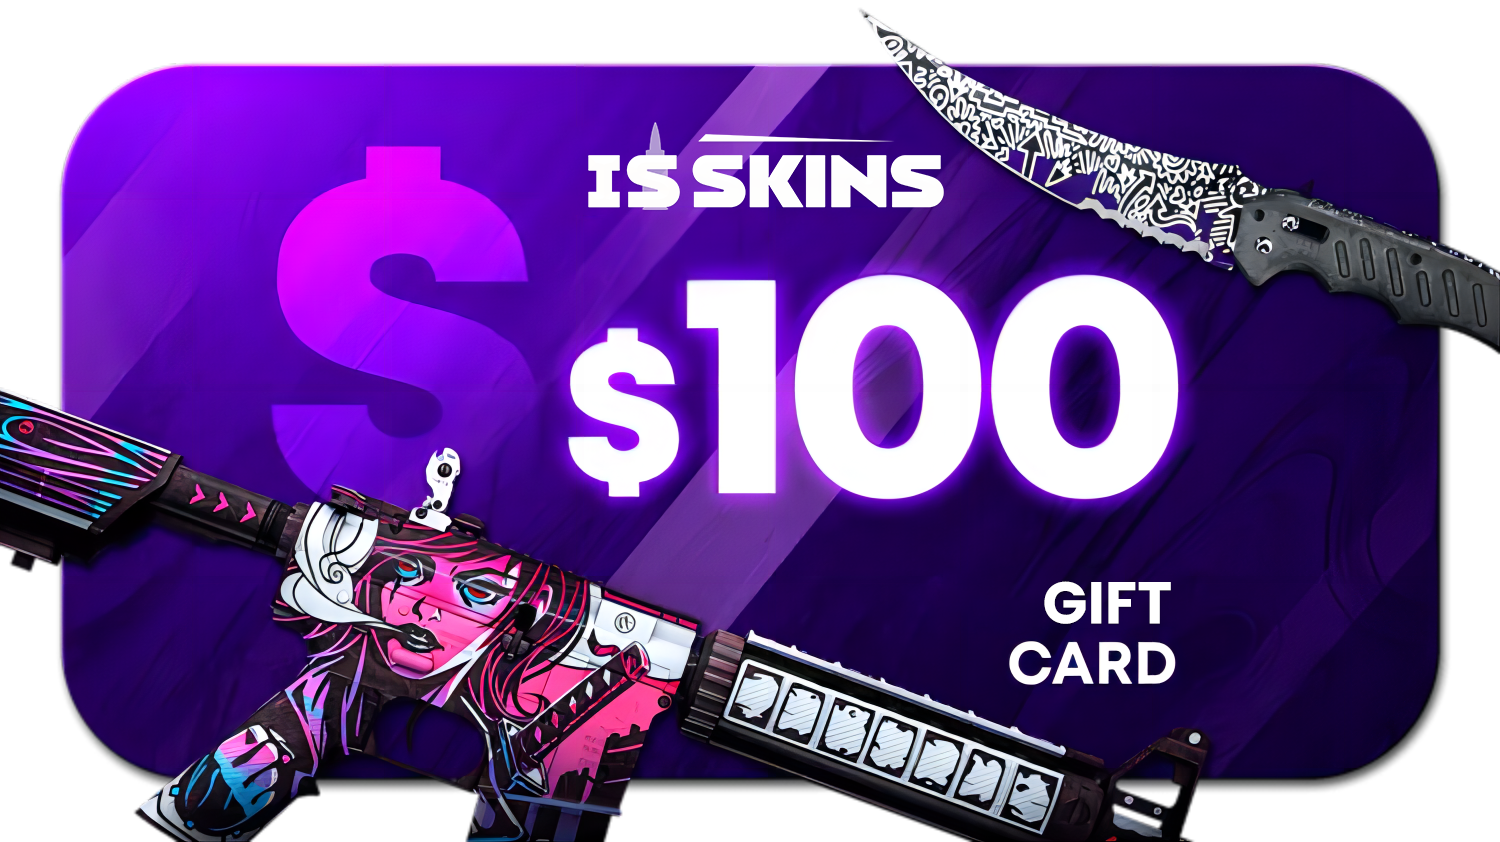 ISSKINS $100 Gift Card